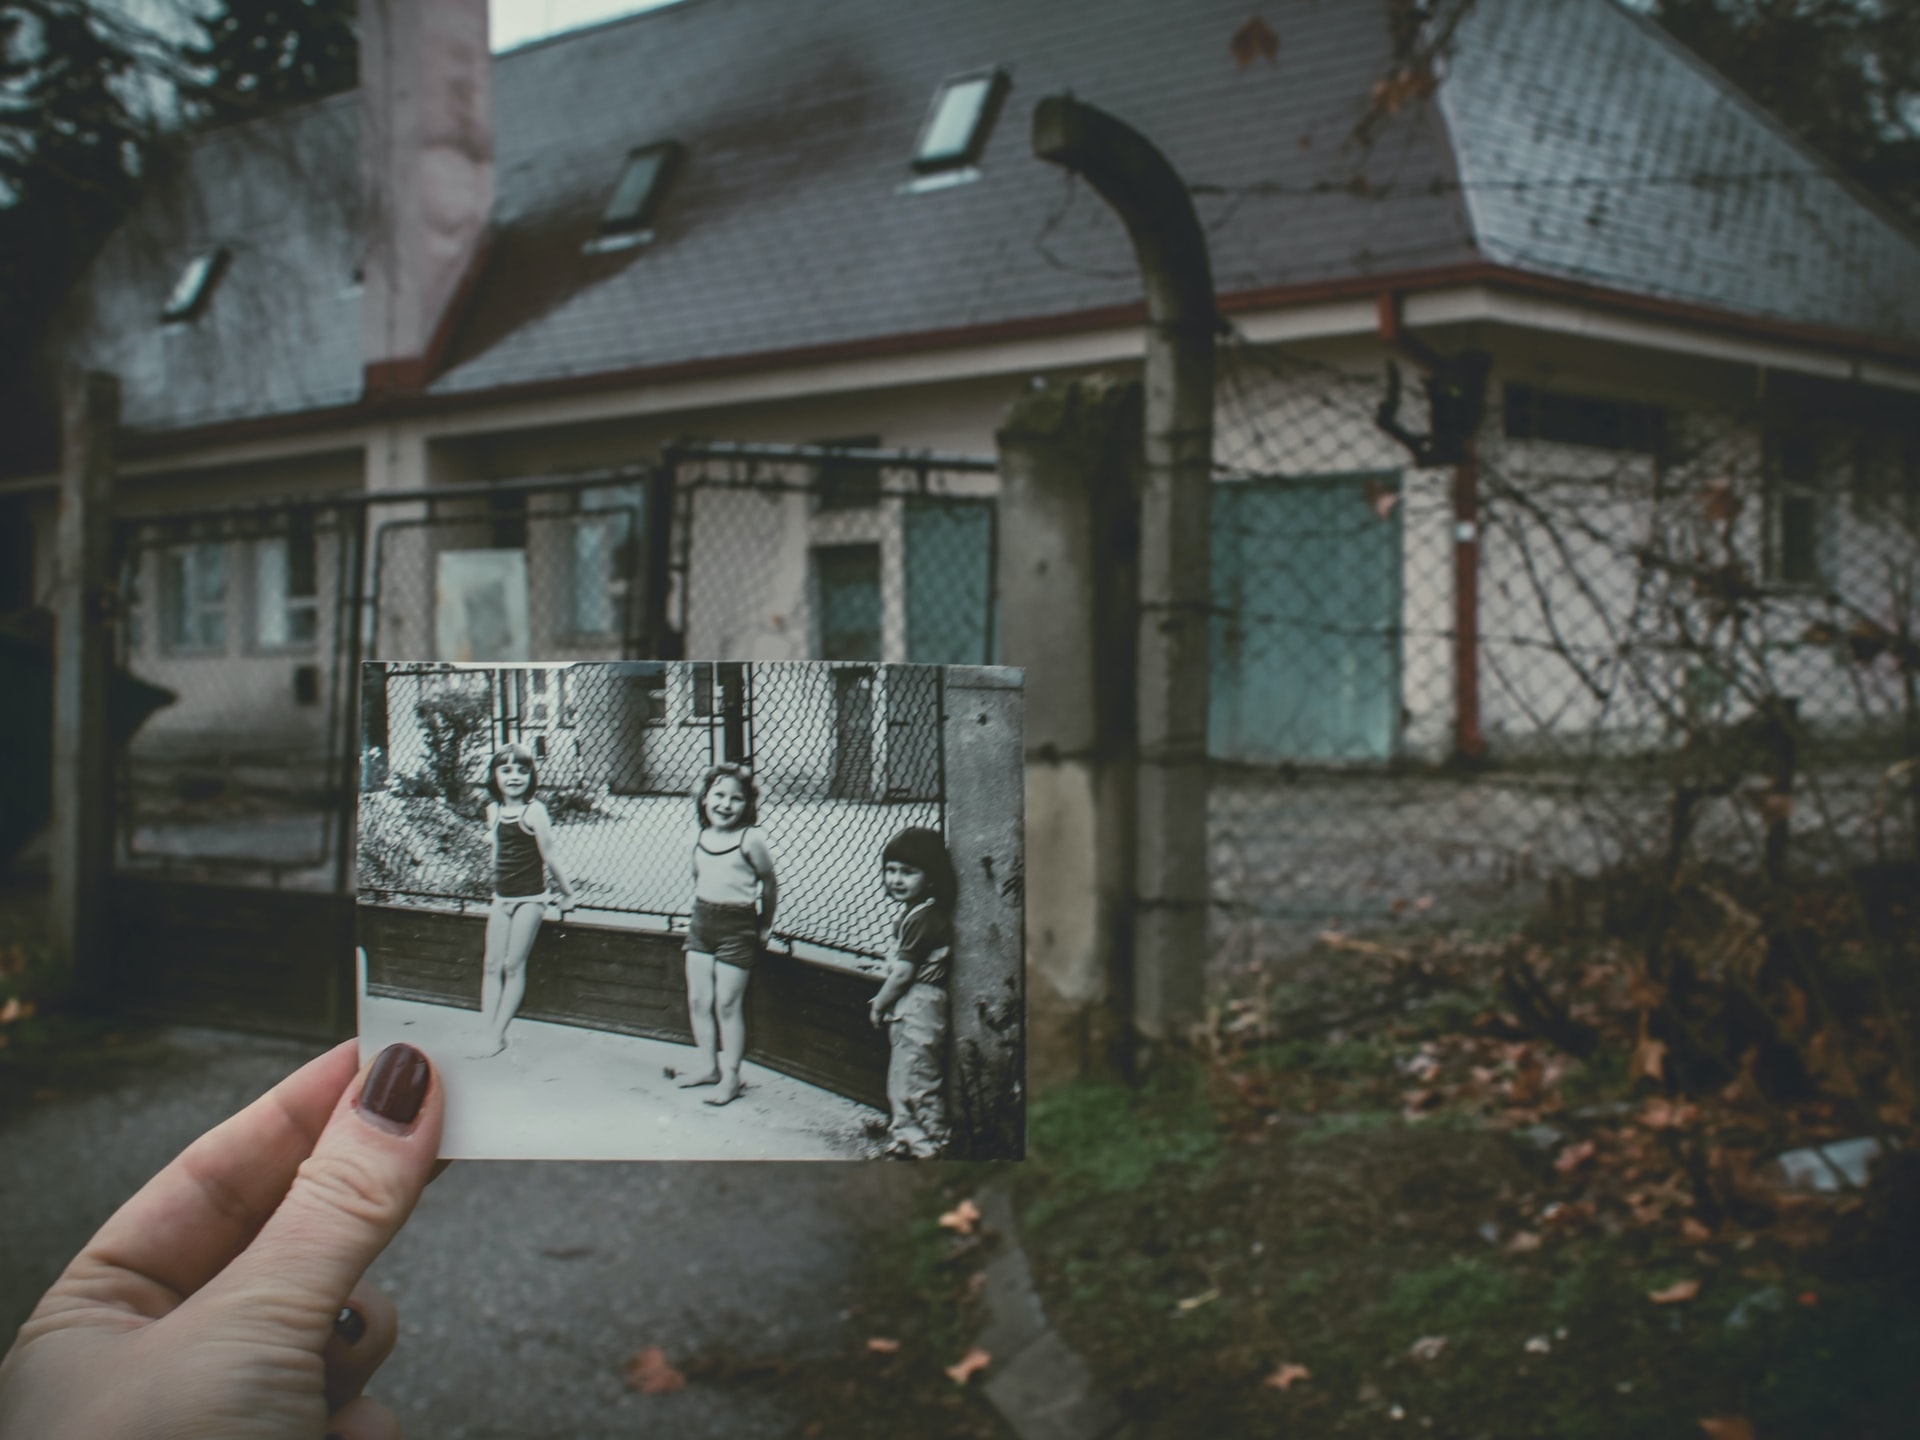 Looking at childhood photo in front of same old house